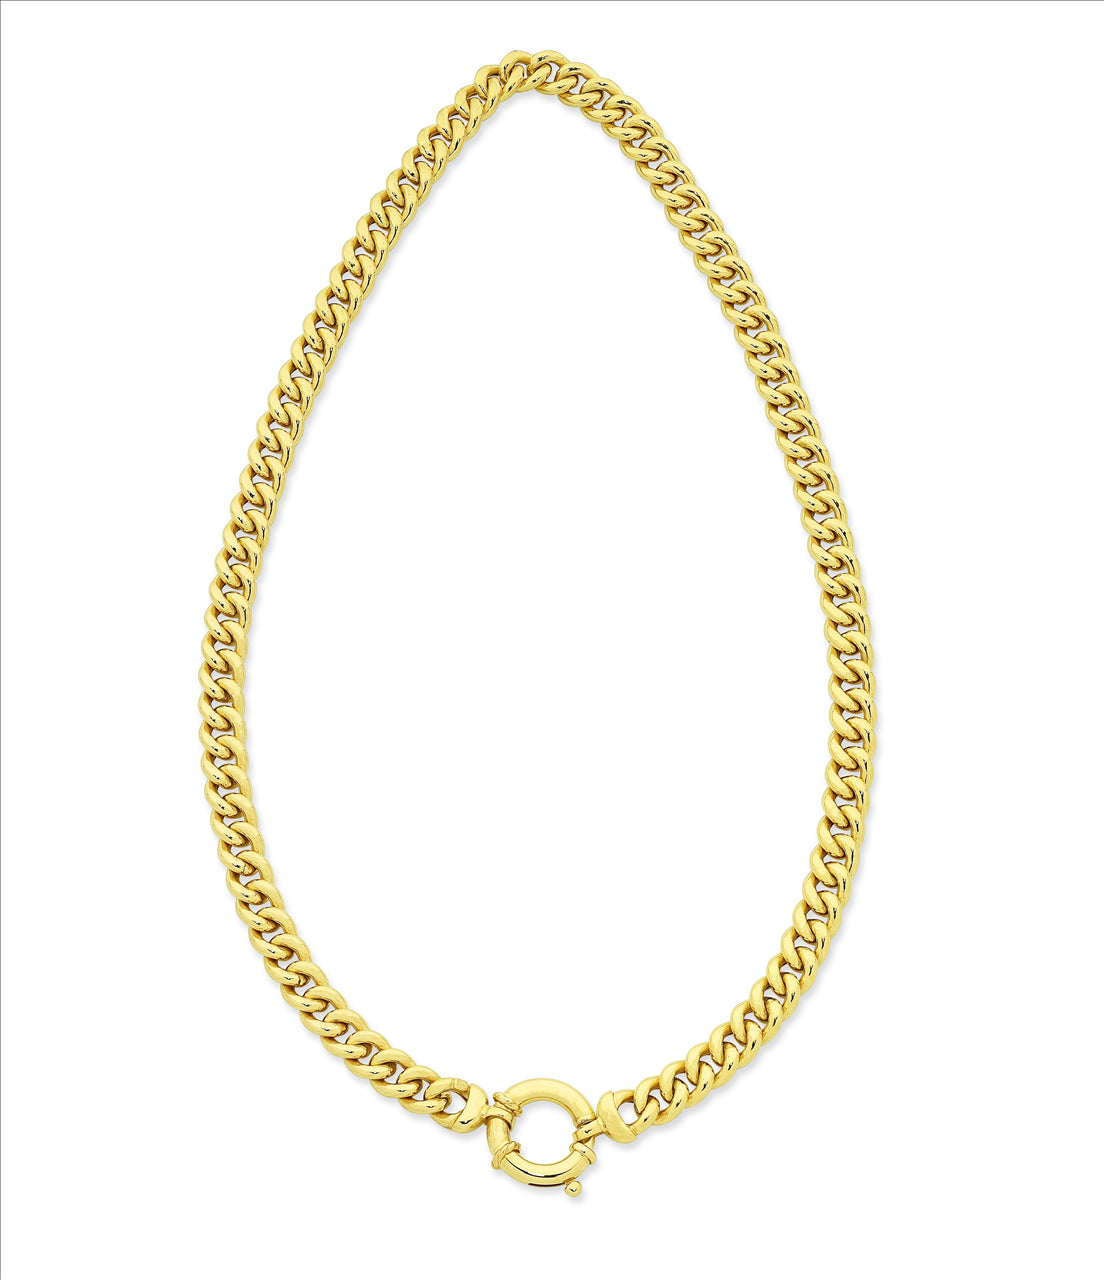 9ct Yellow Gold Silver Filled Curb Chain 45cm